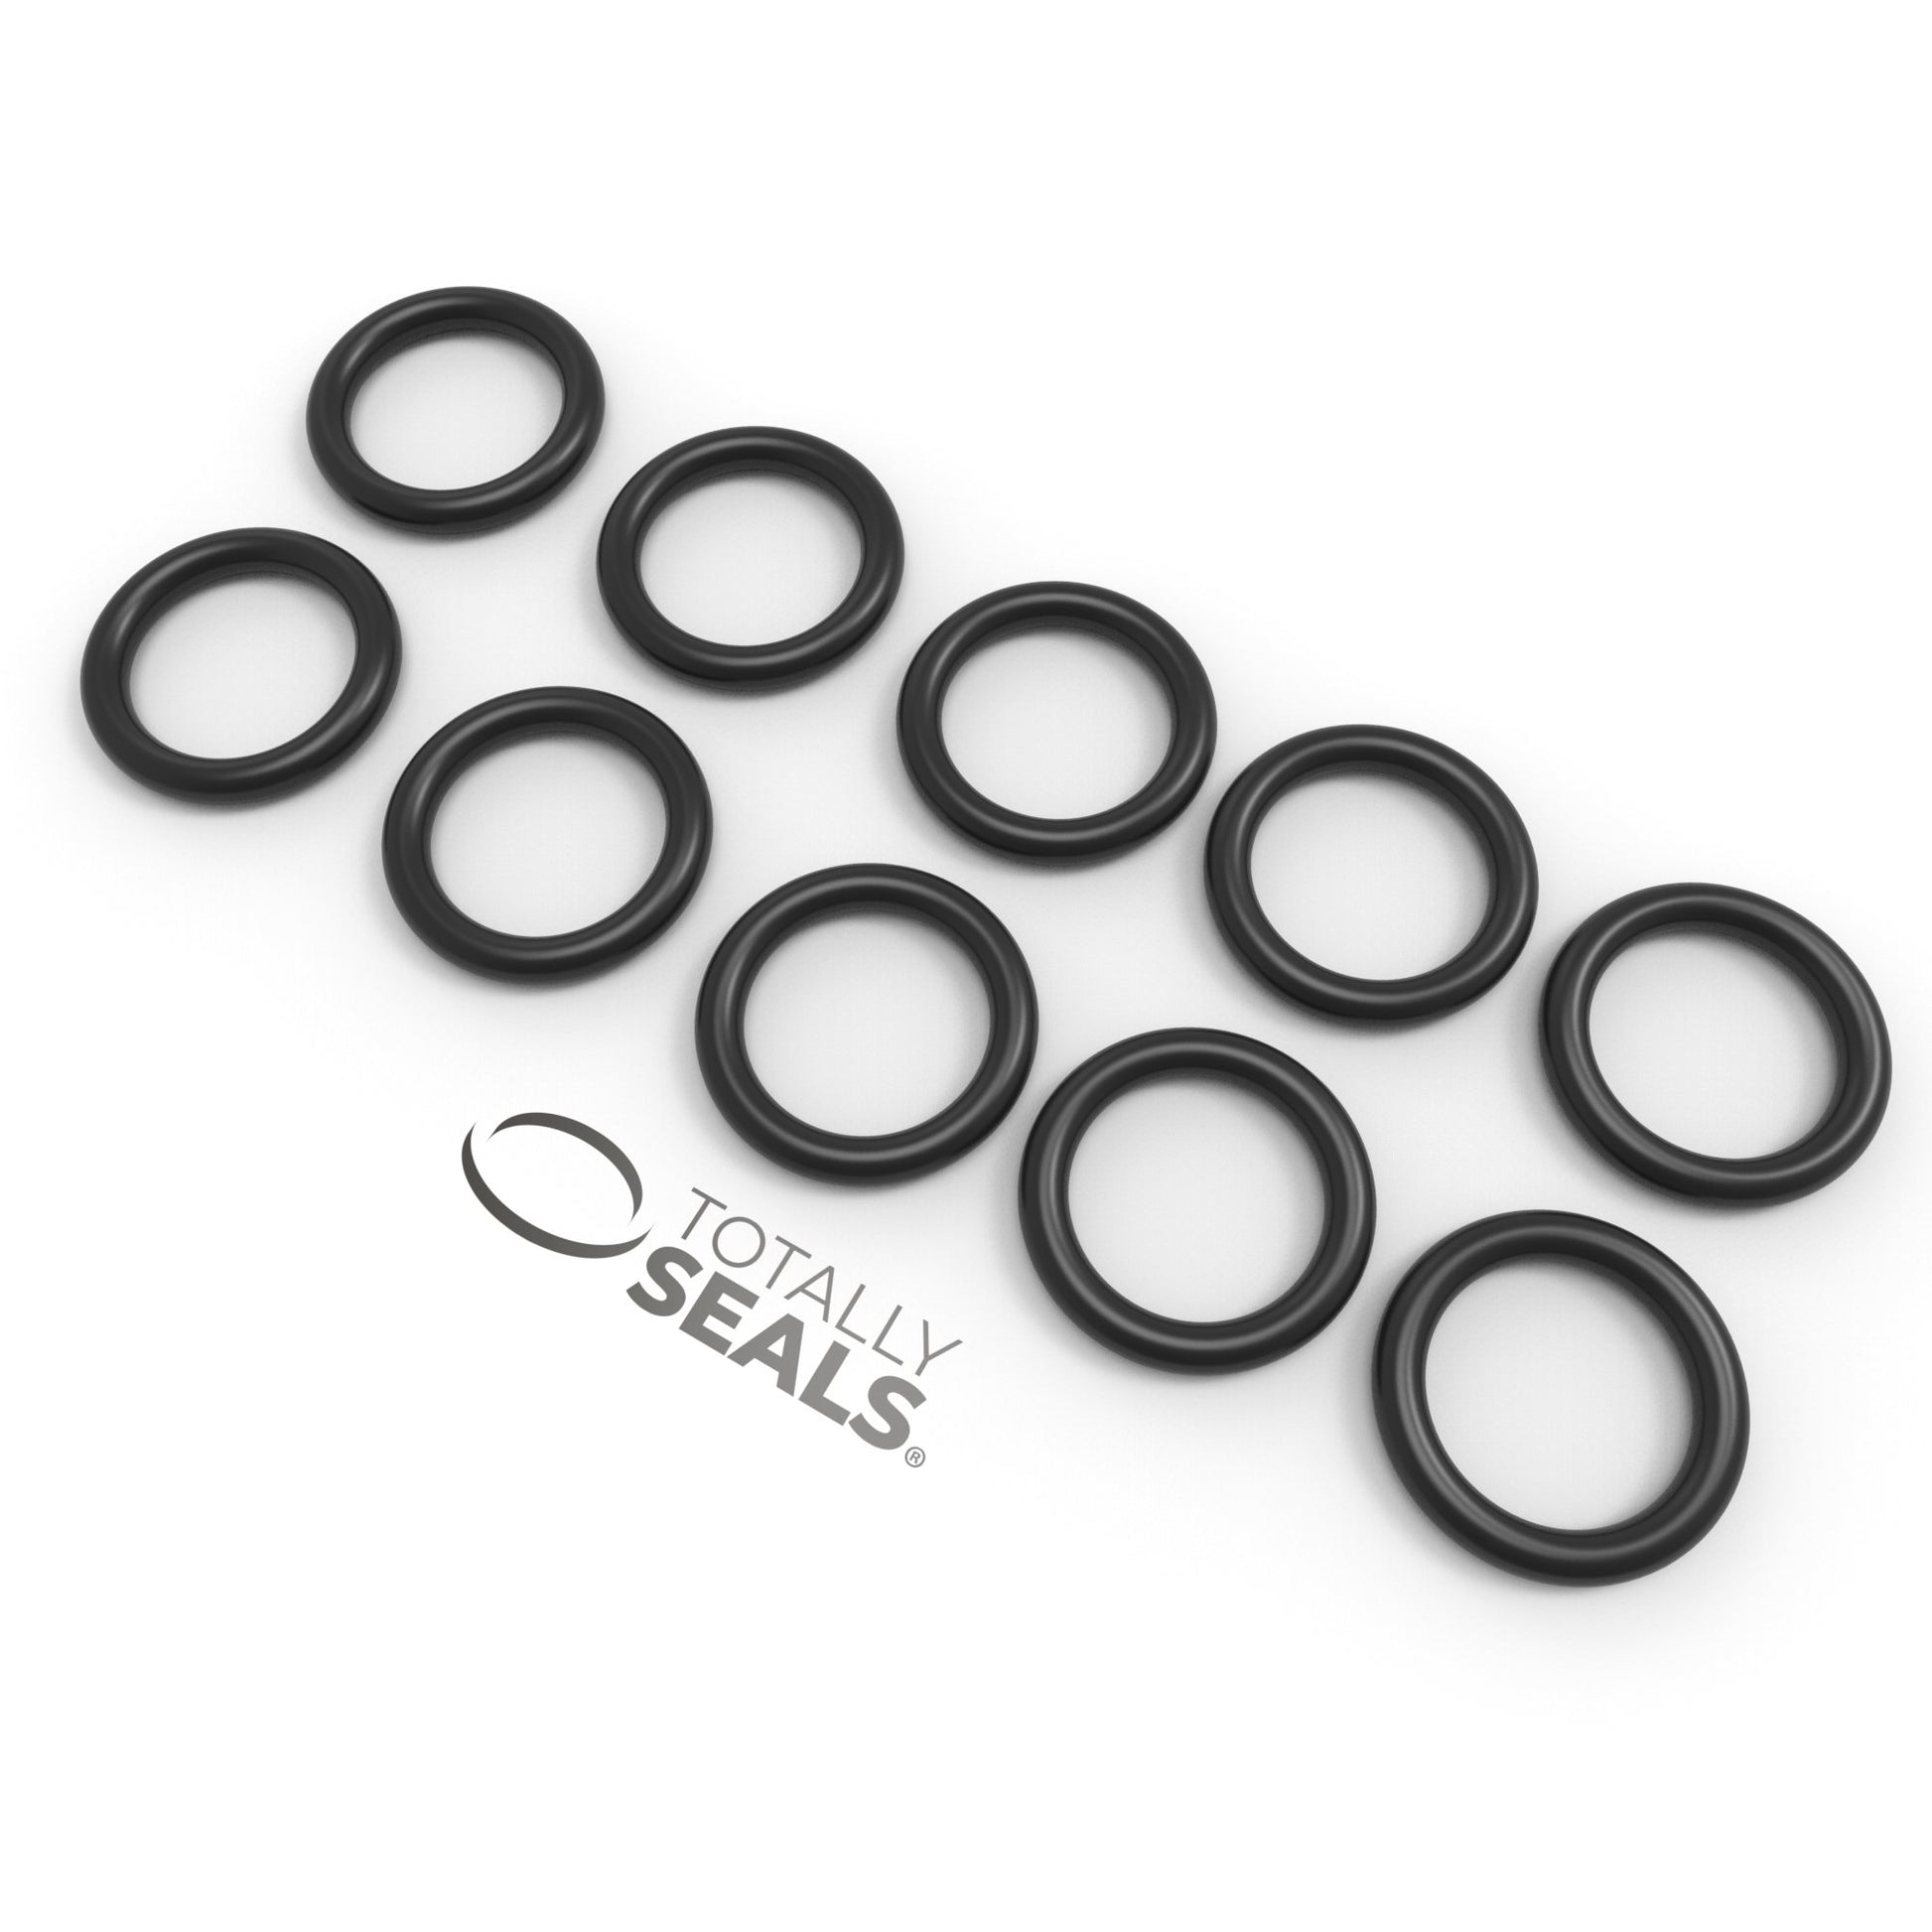 Heat Resistant Inconel 625 BX161 Metal O Ring - Rubber Seals and